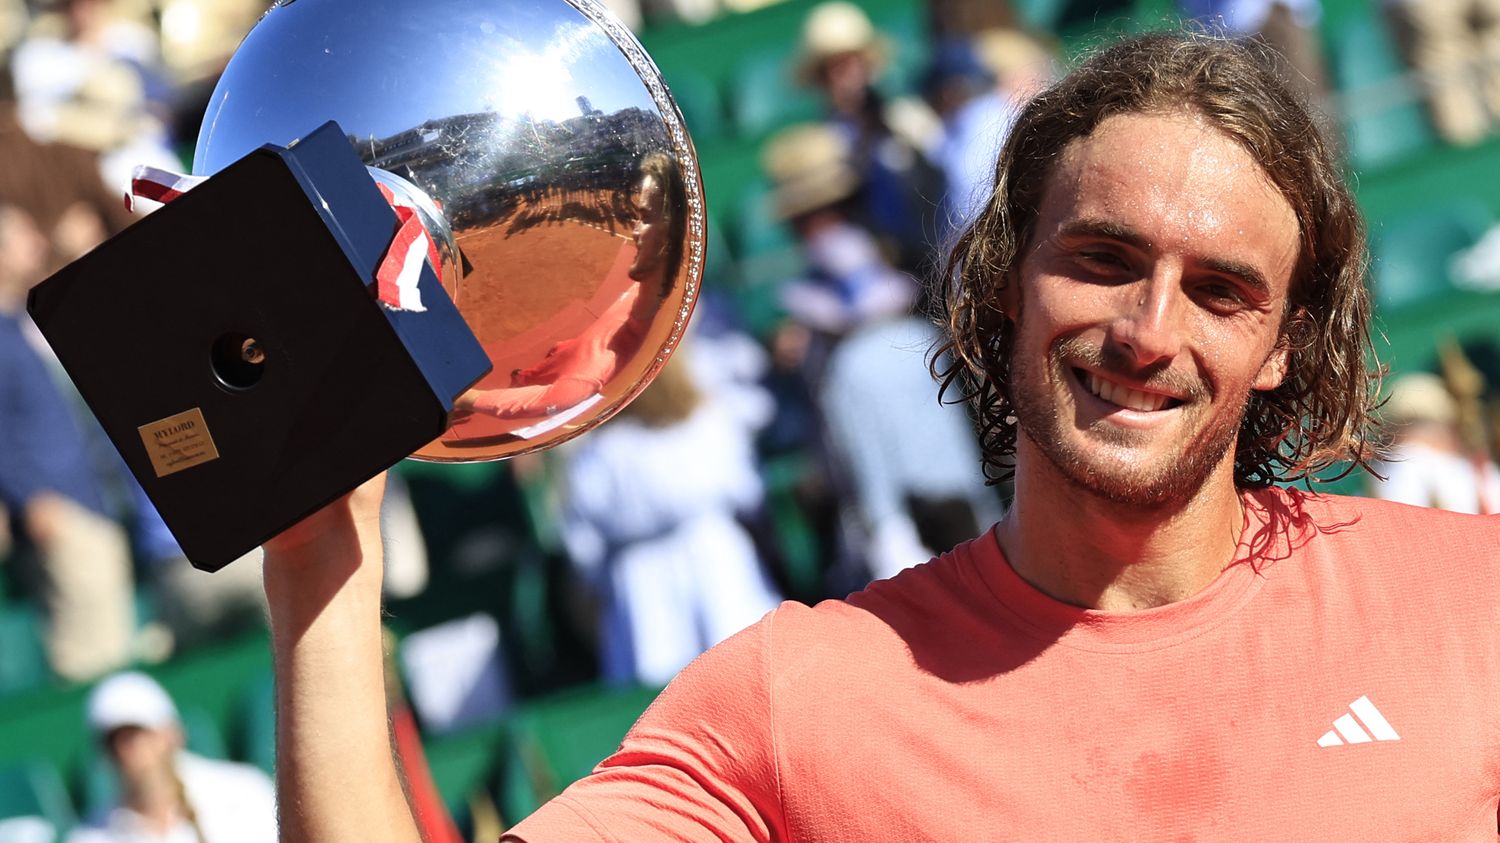 Monte-Carlo: Relive Stefanos Tsitsipas' victory against Casper Ruud in the tournament final